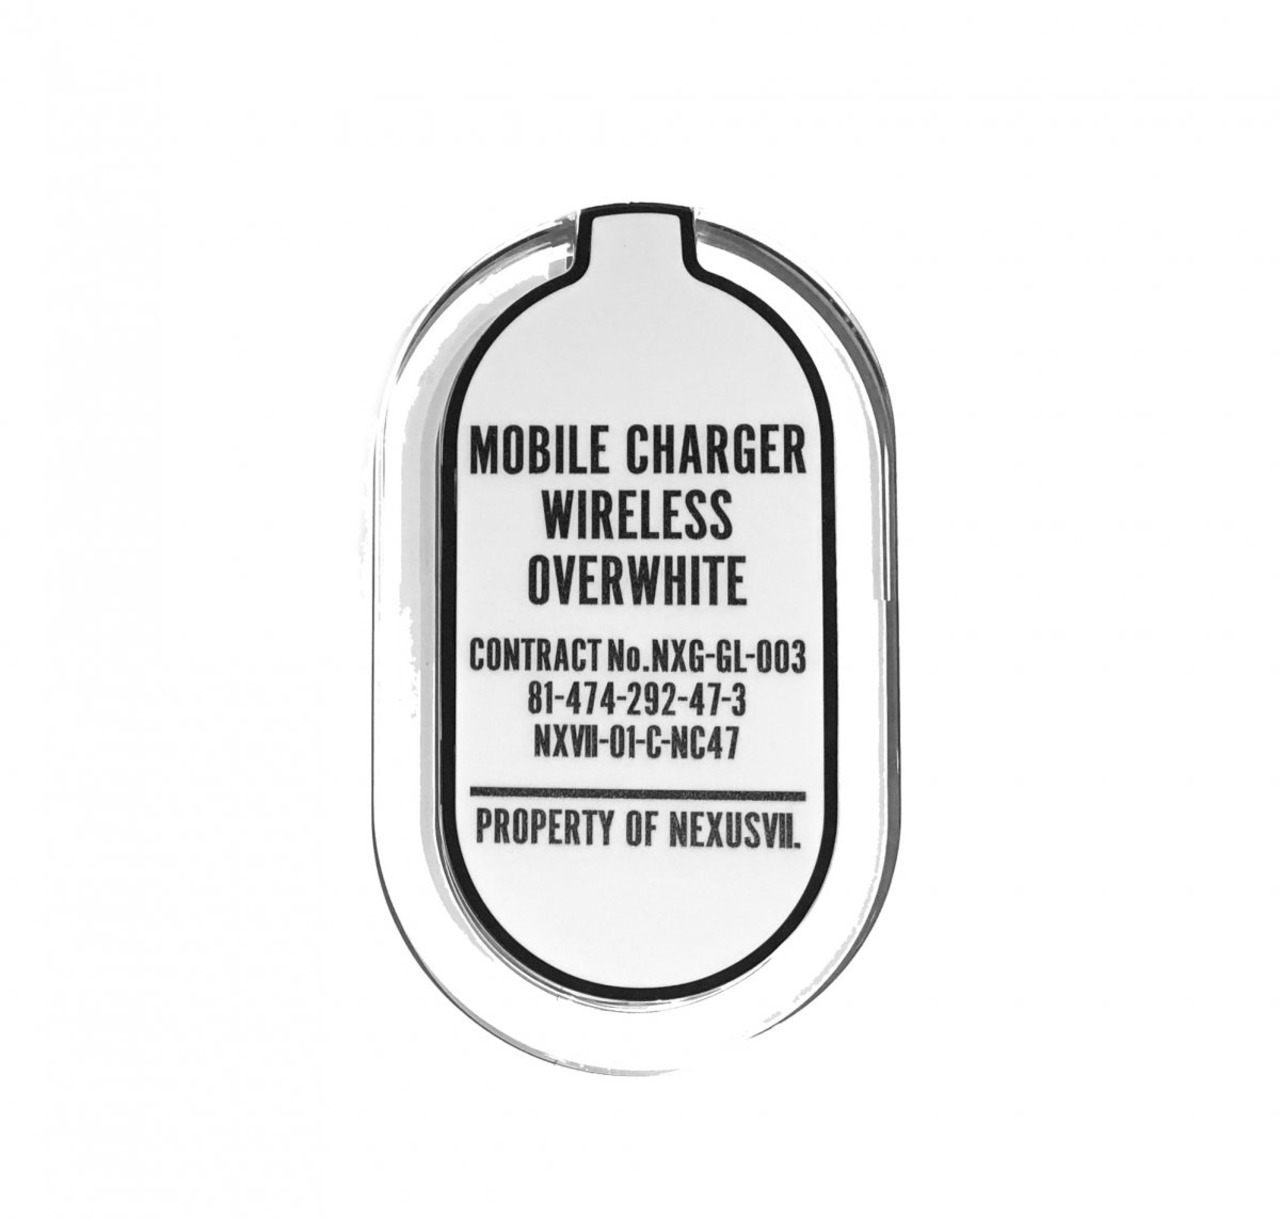 MOBILE CHARGER WIRLESS